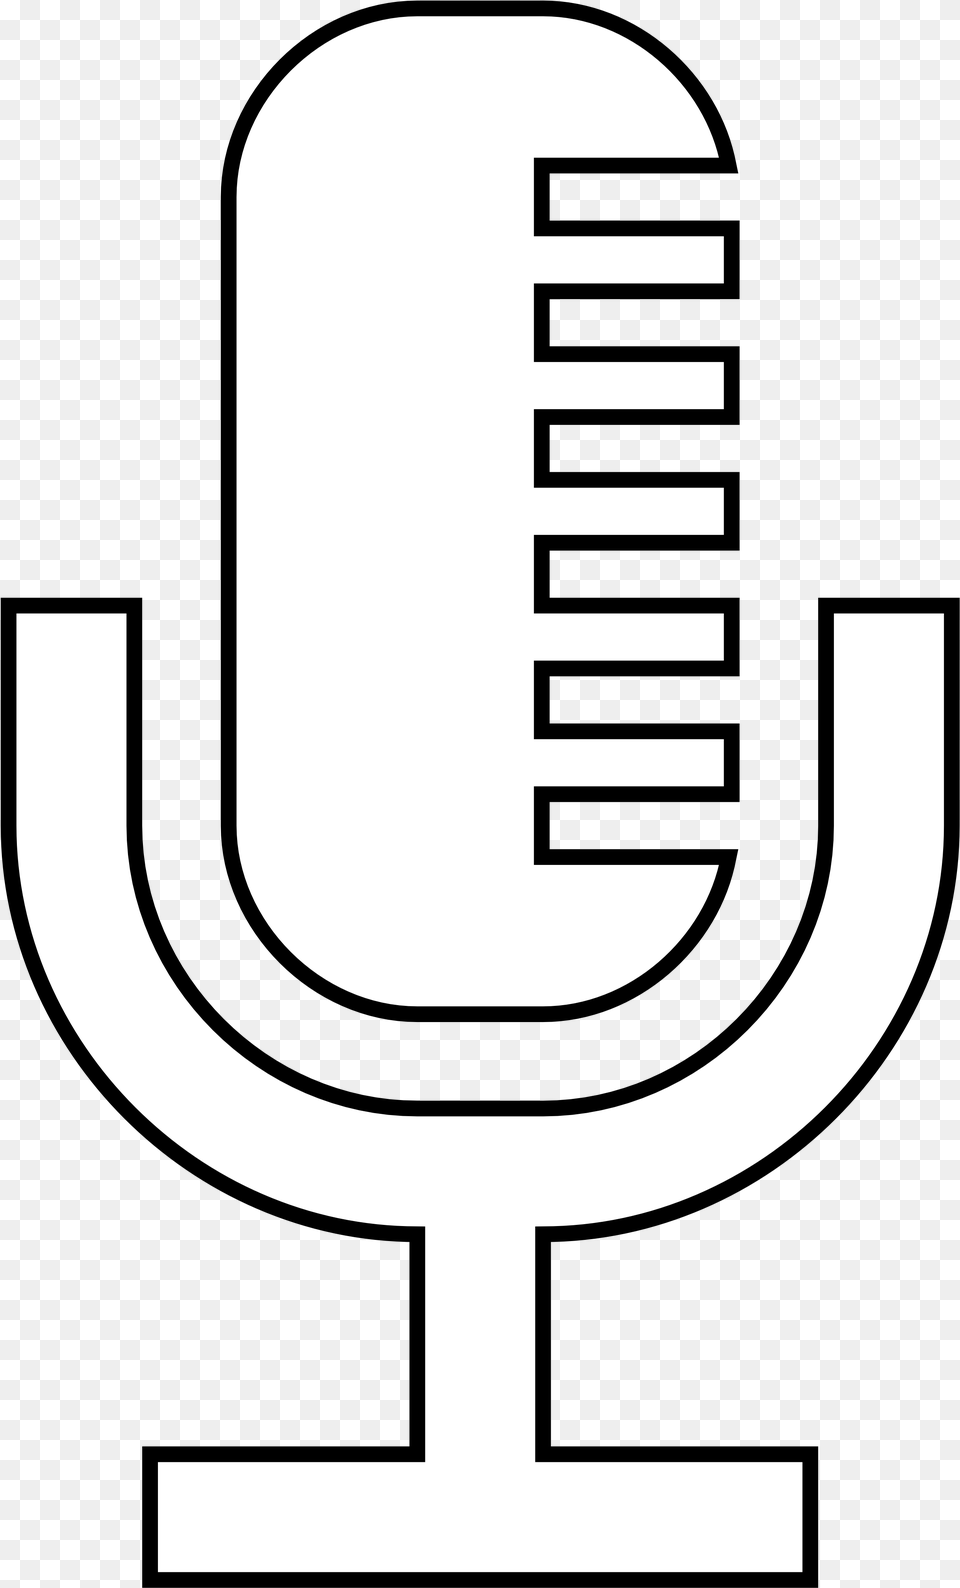 Microphone Logo Clipart Best Mic Black And White Clipart, Electrical Device Png